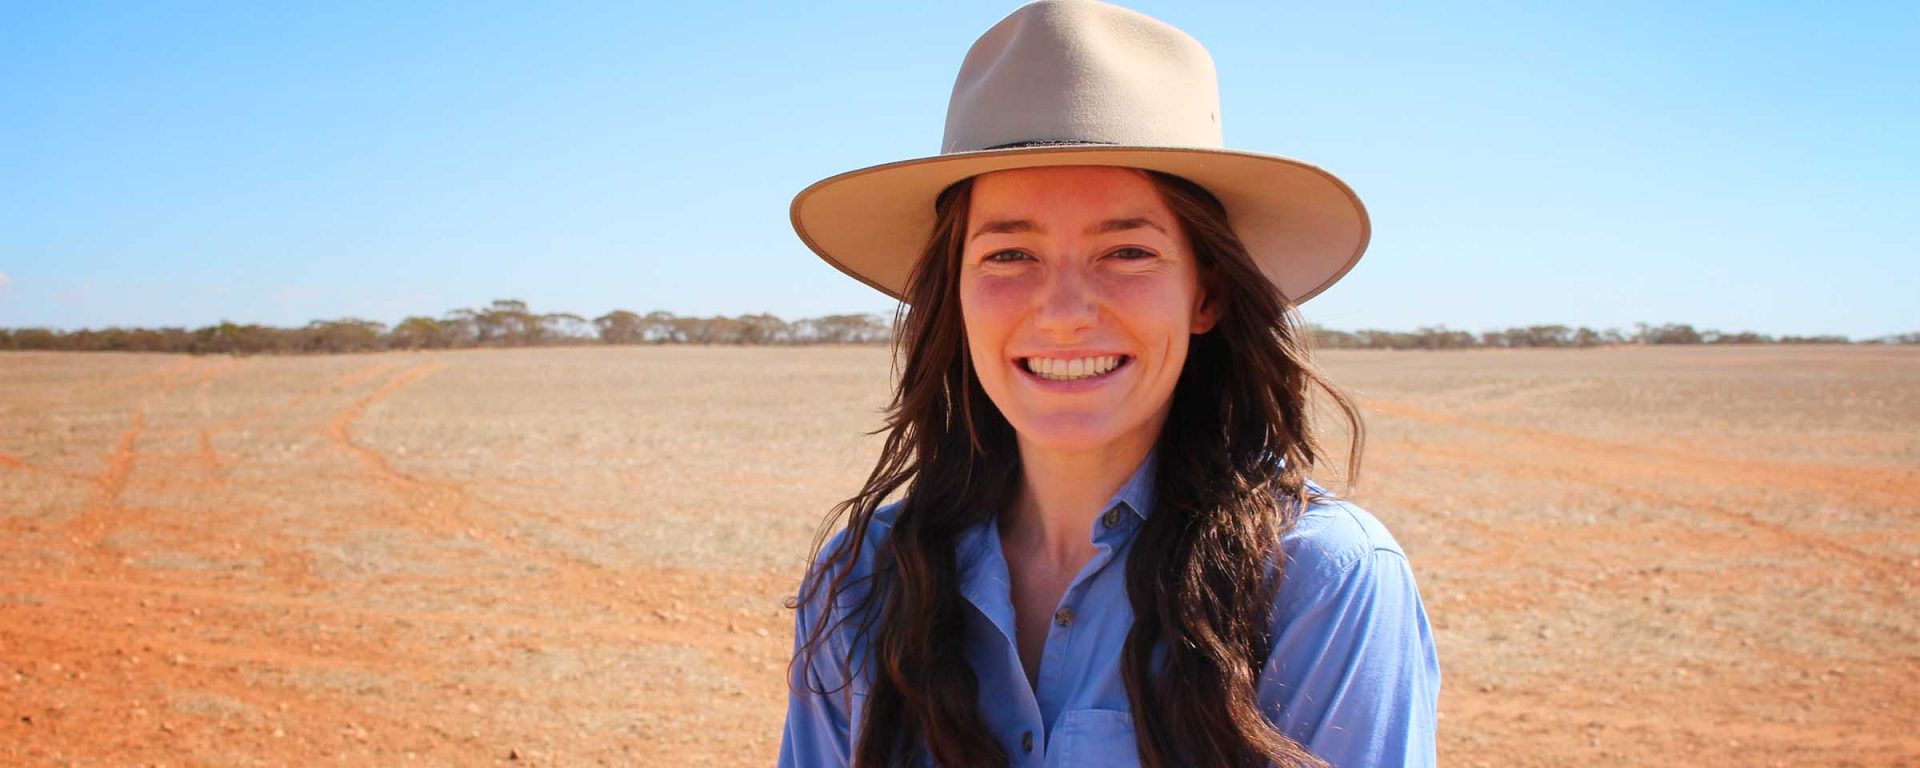 Demi Taylor in a rural setting. Demi is the recipient of an agriculture scholarship from Charles Sturt University